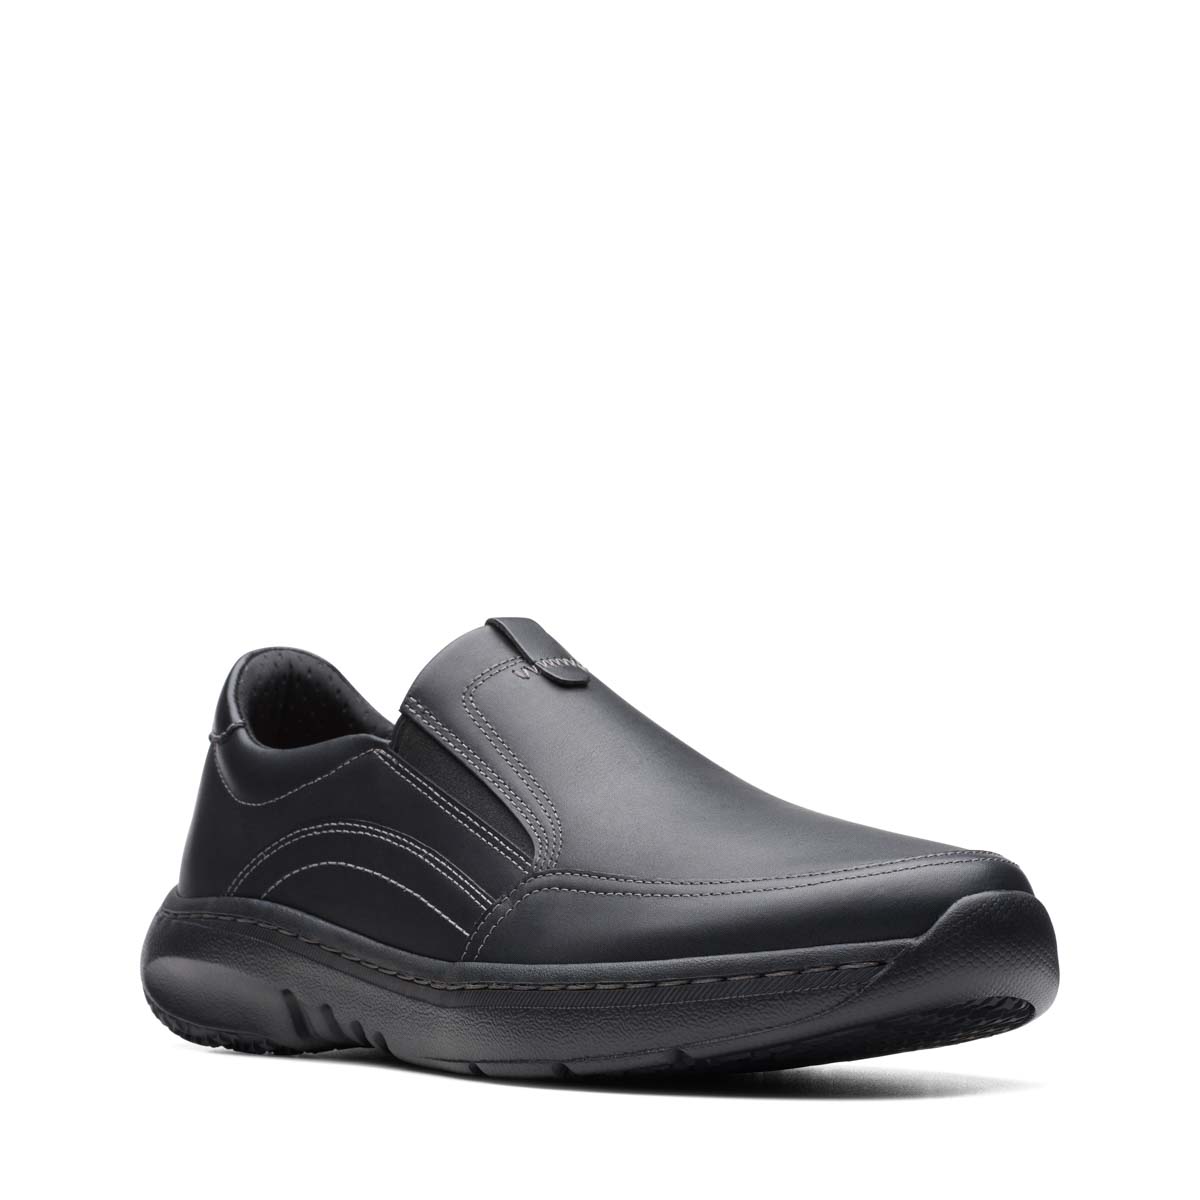 Clarks Clarkspro Step Black leather Mens Slip-on Shoes 7519-68H in a Plain Leather in Size 11